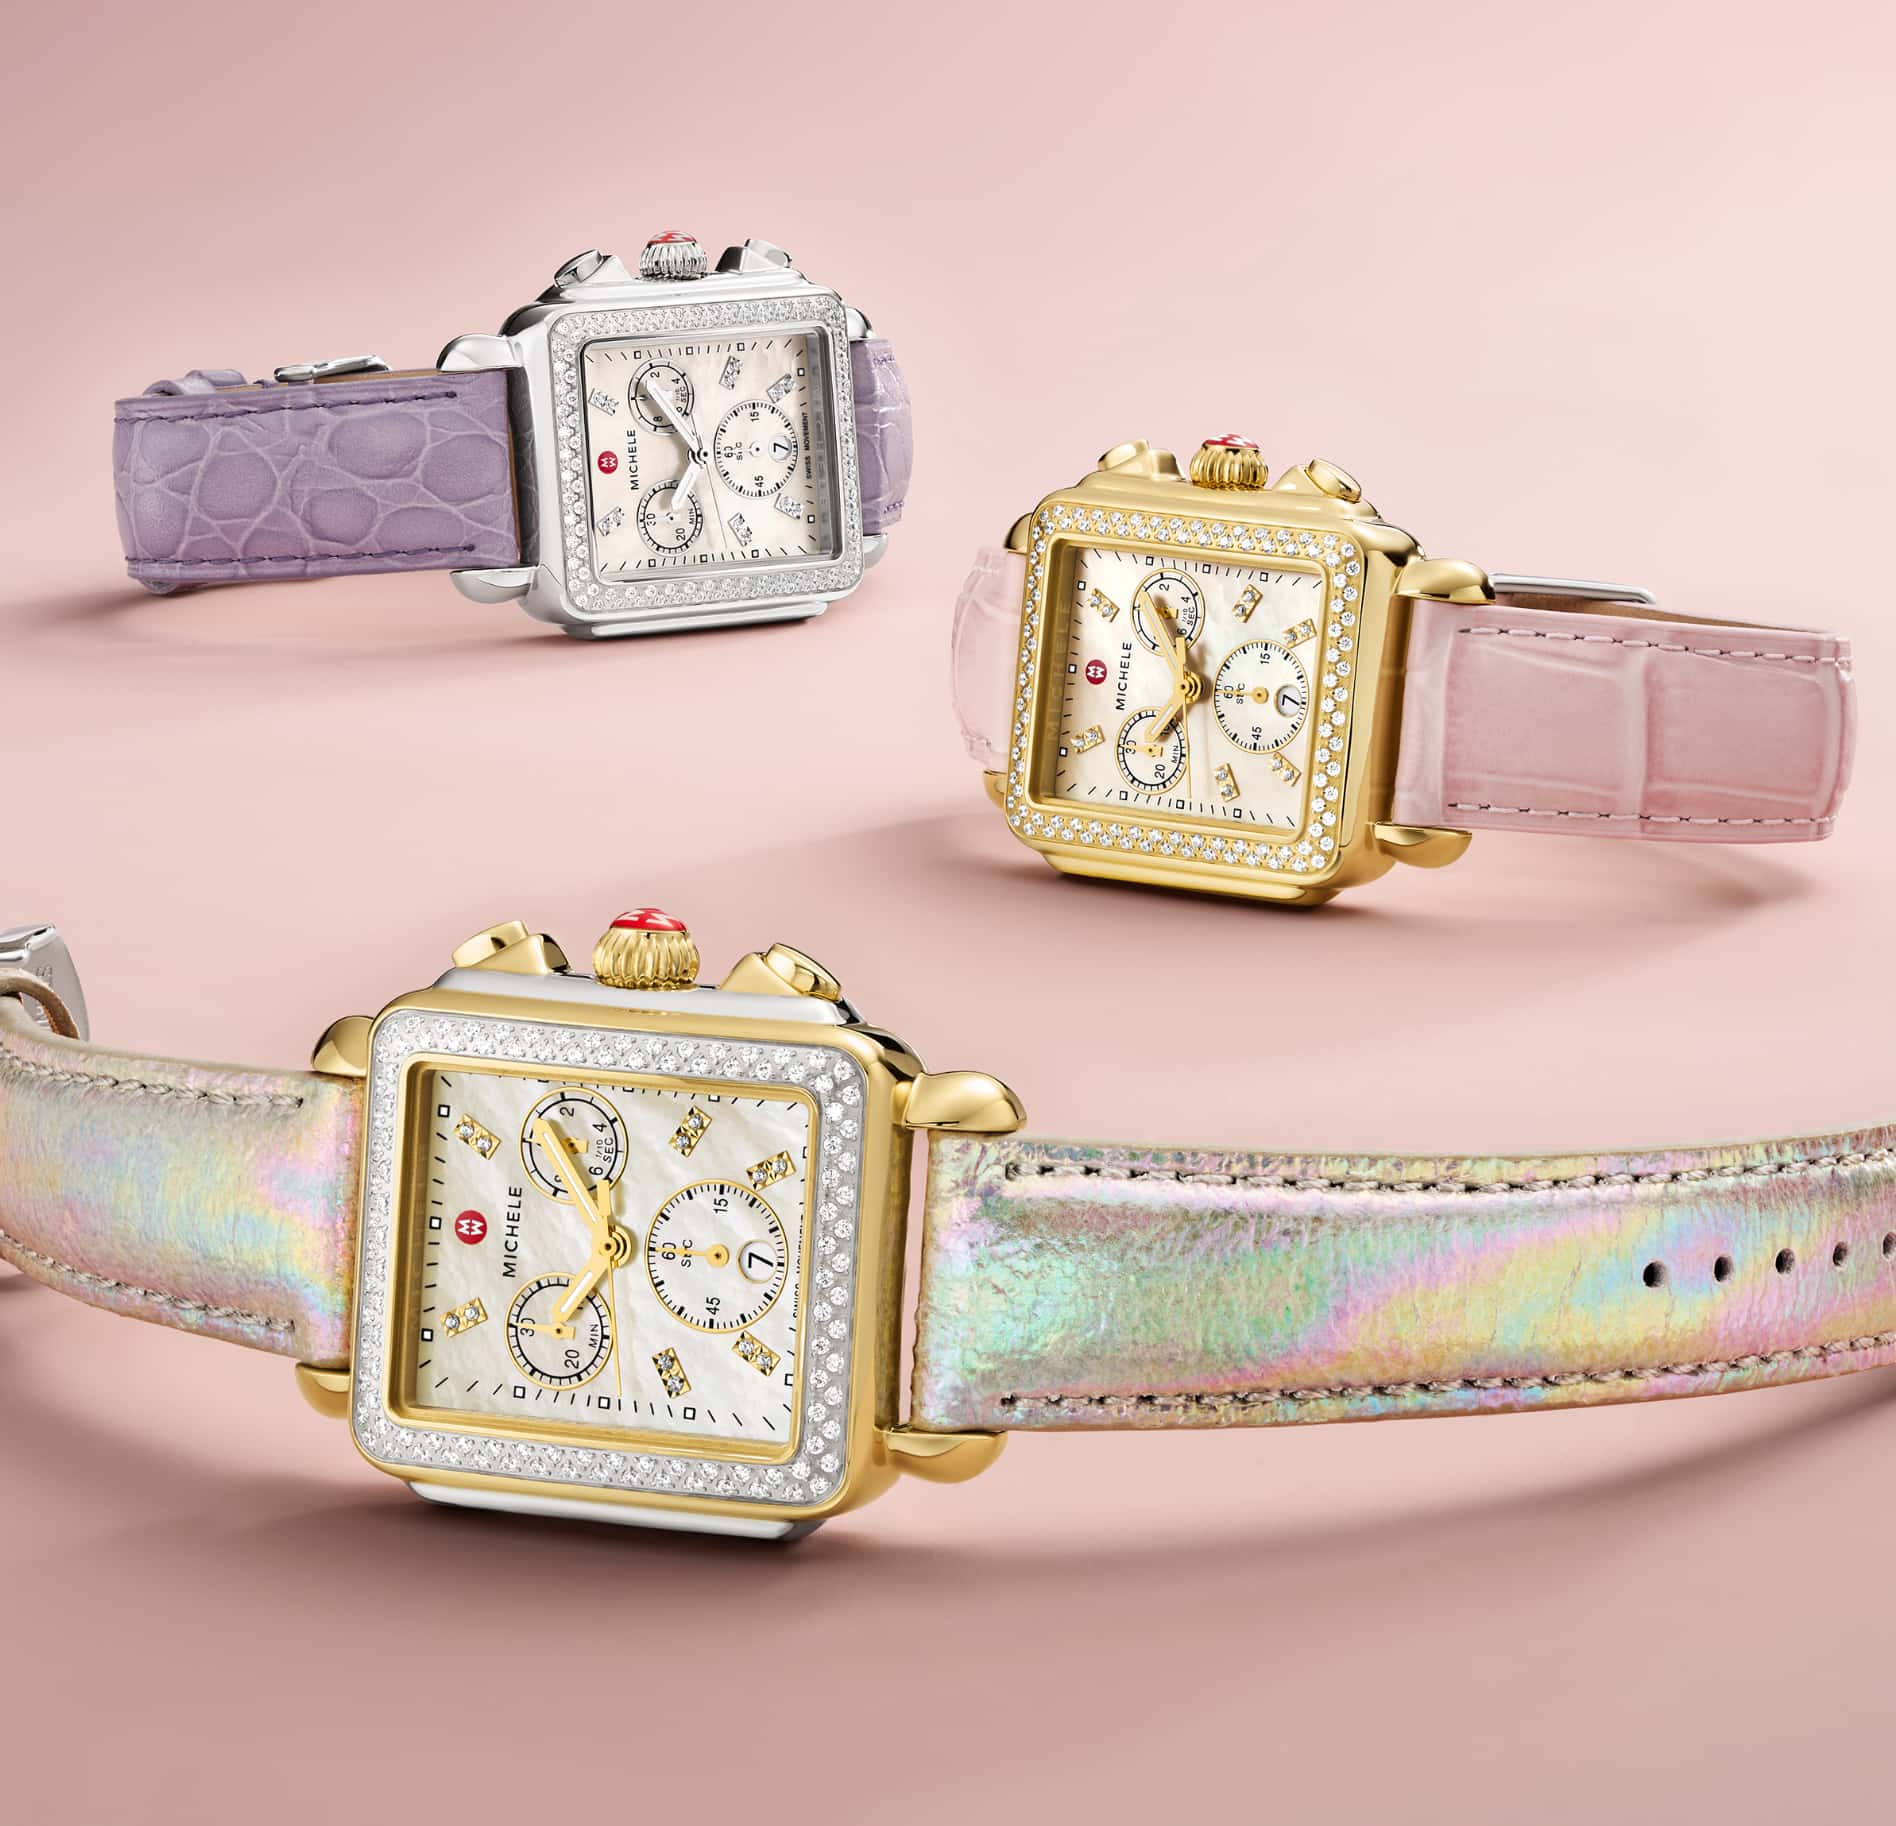 iridescent, lavender and pink leather straps